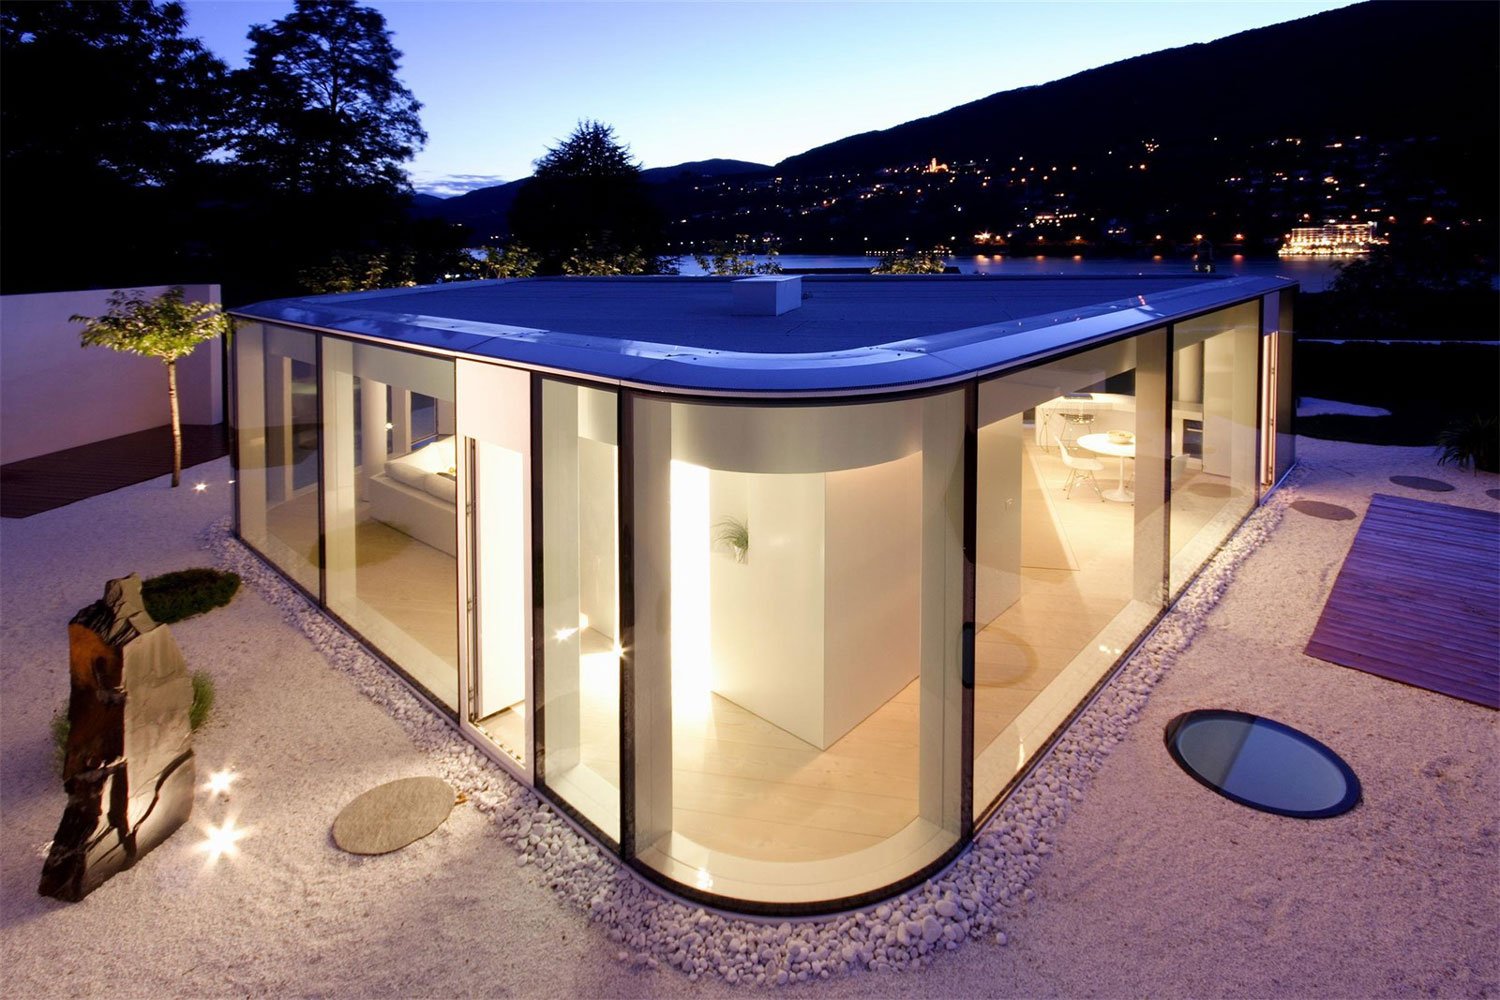 This villa is enveloped in glass to take full advantage of its location on Lake Lugano with state-of-the-art materials, luxurious finishes, and designer furniture..